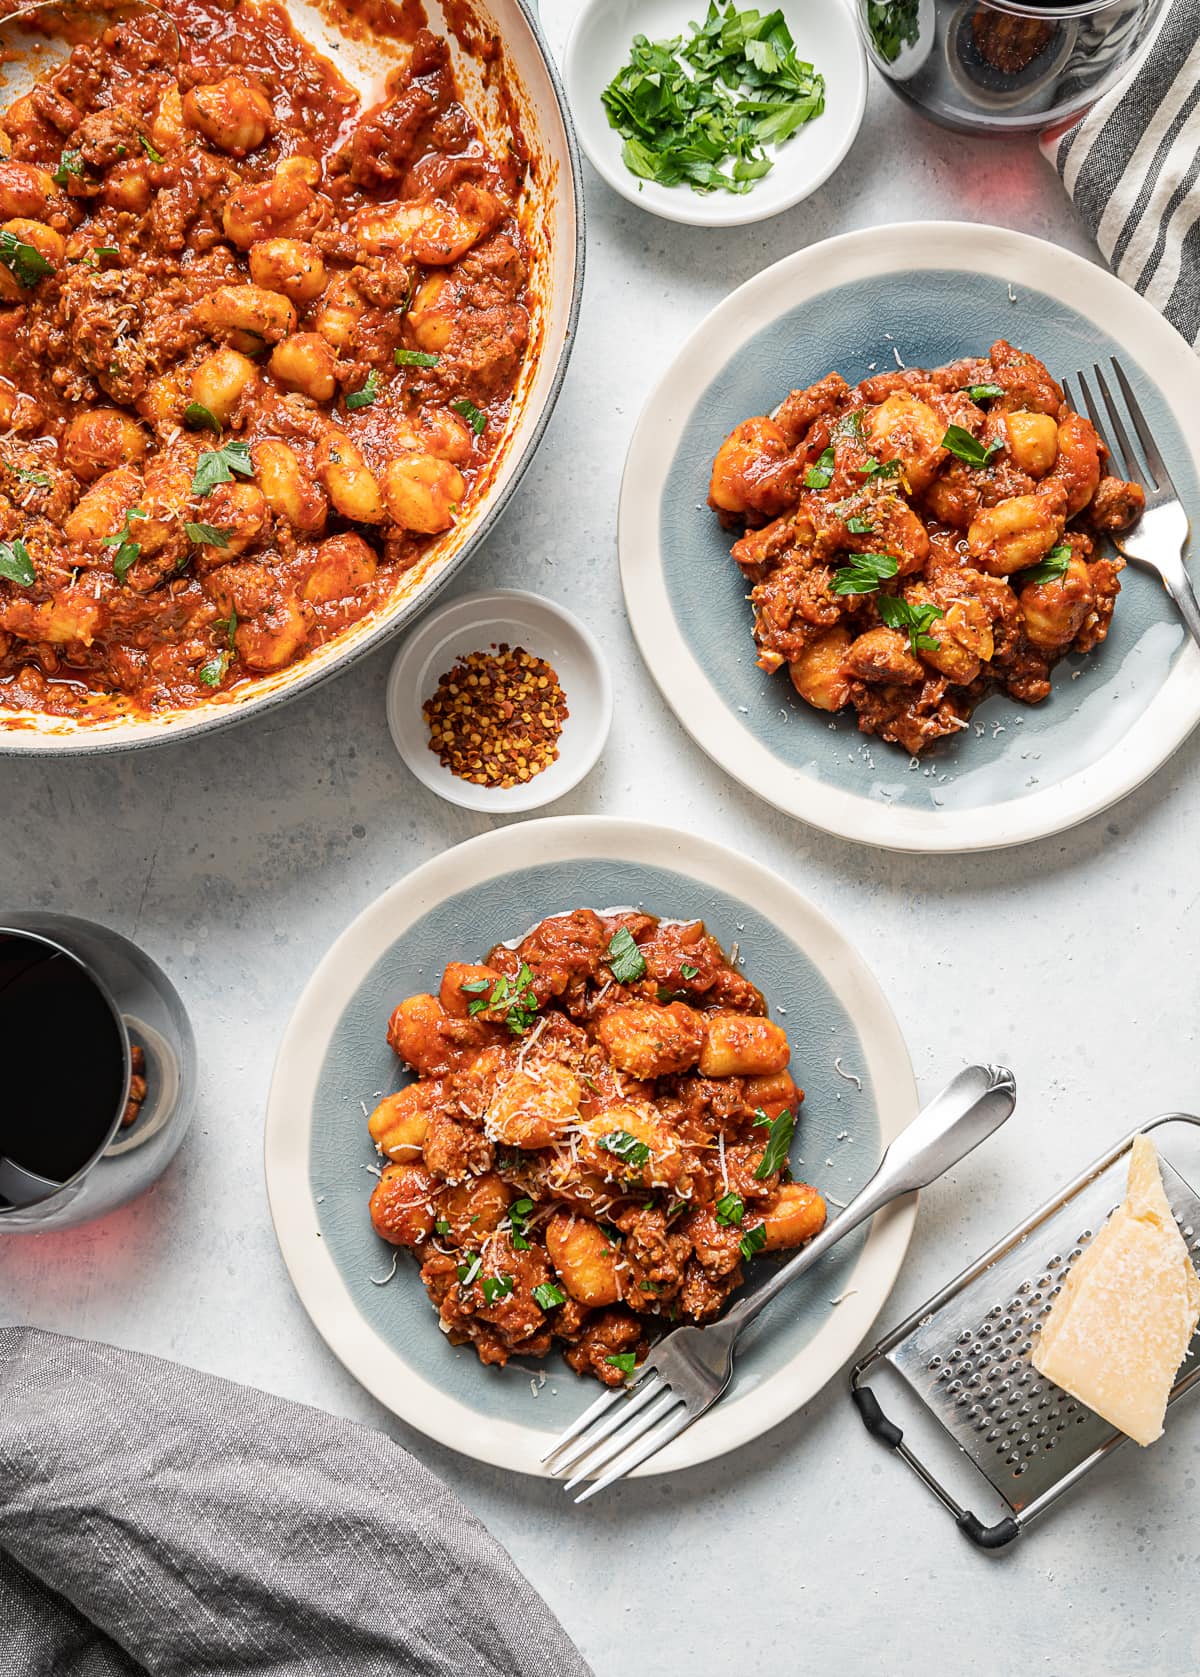 two small plates with red tomato sauce sausage and gnocchi, forks, glasses of wine, small bowls of red pepper flakes and fresh parsley, large bowl of red sauce with sausage and gnocchi